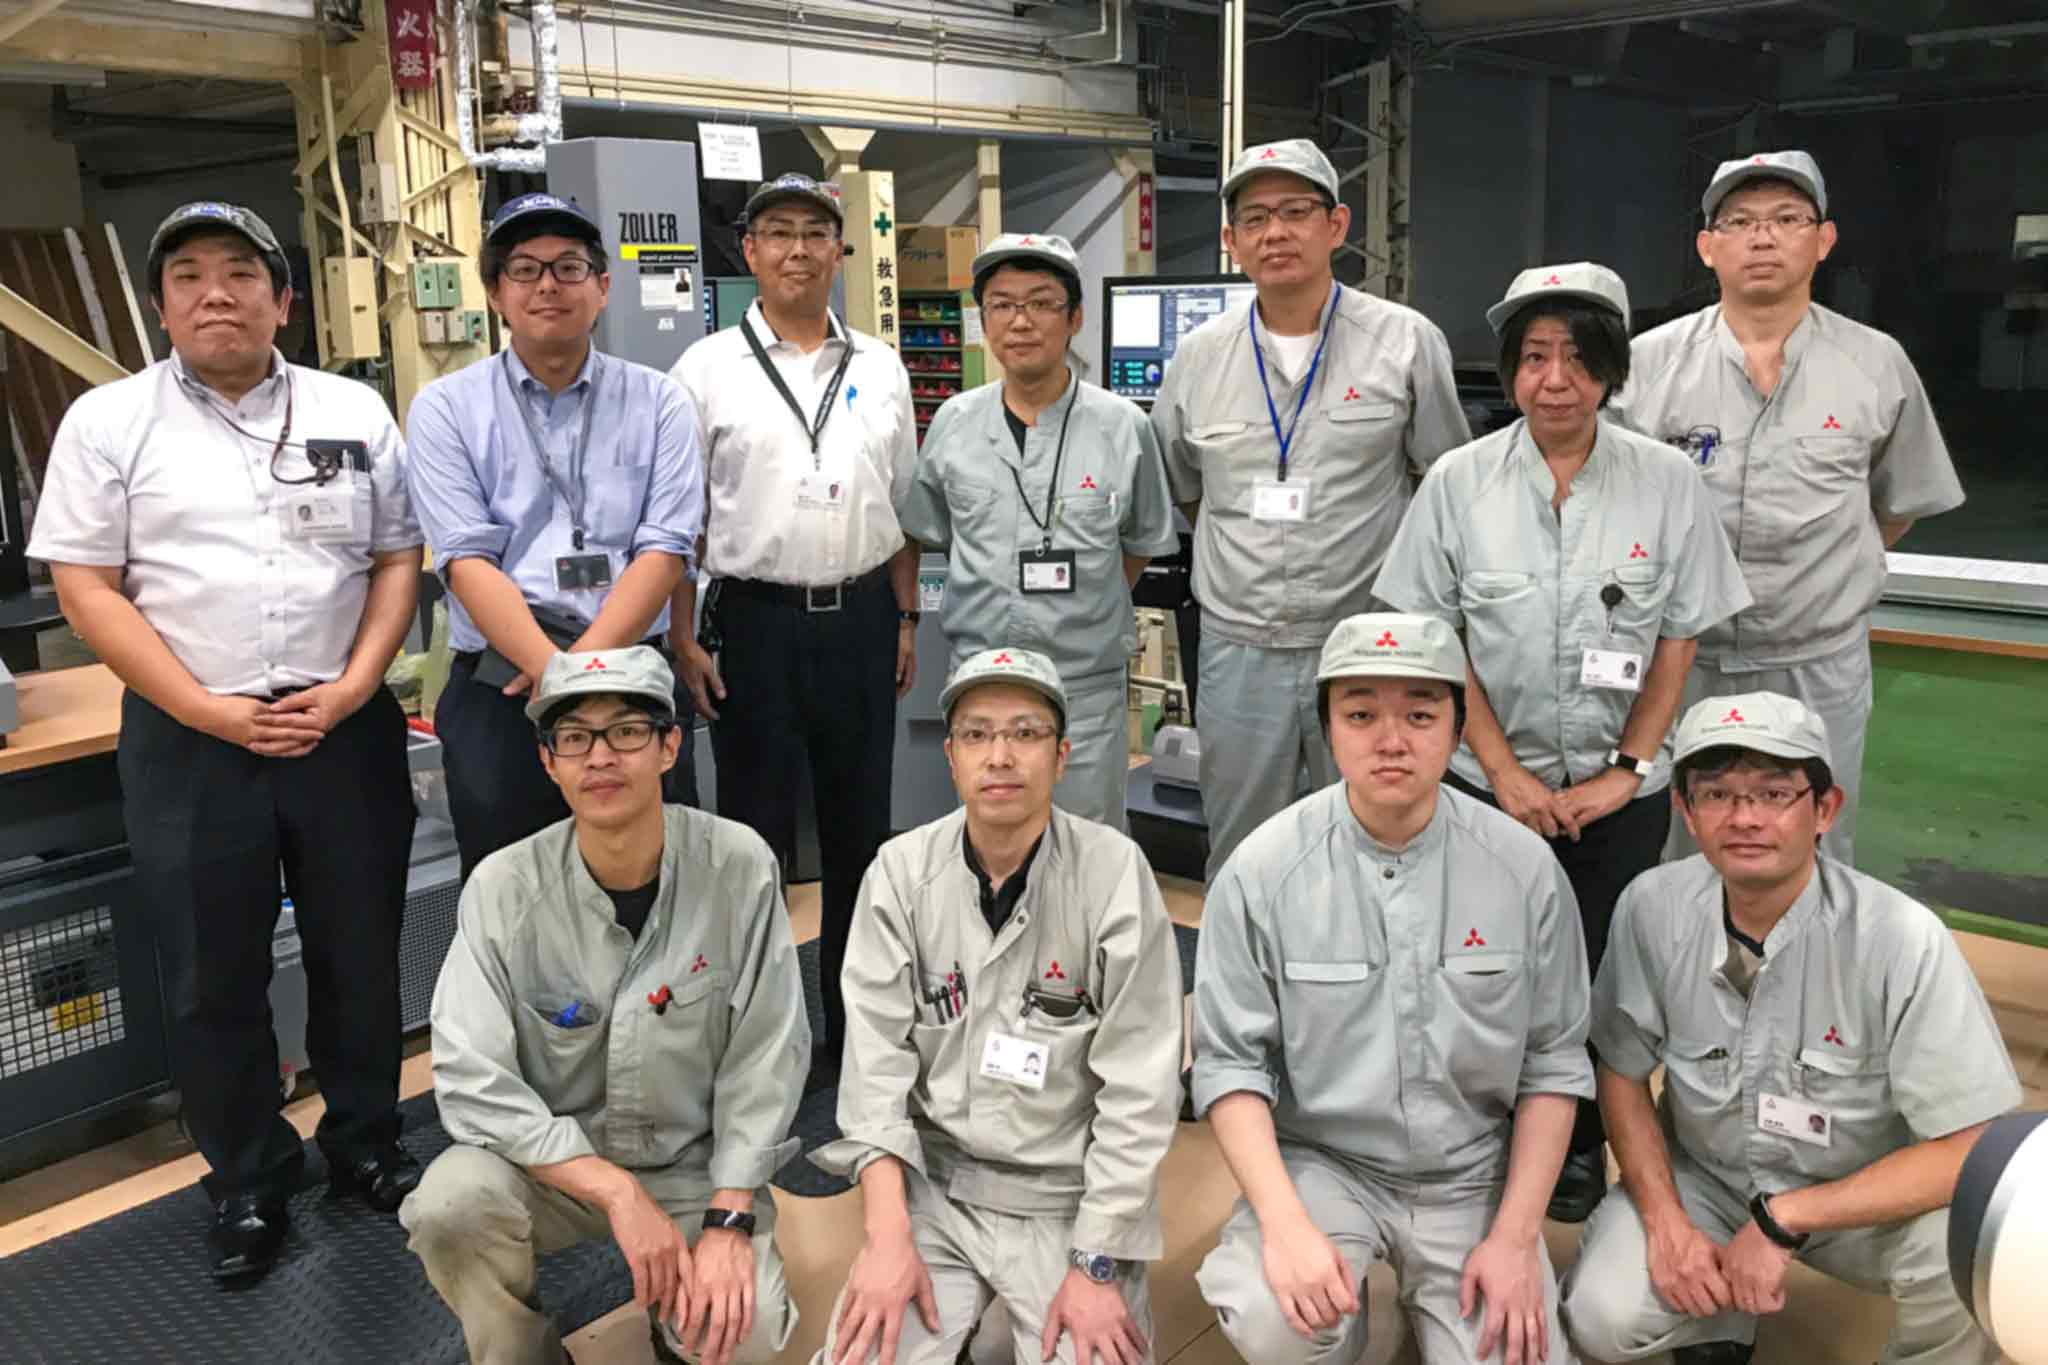 The teams from MMC and MAPAL, a total of eleven people, stand in front of a machine in the manufacturing area.